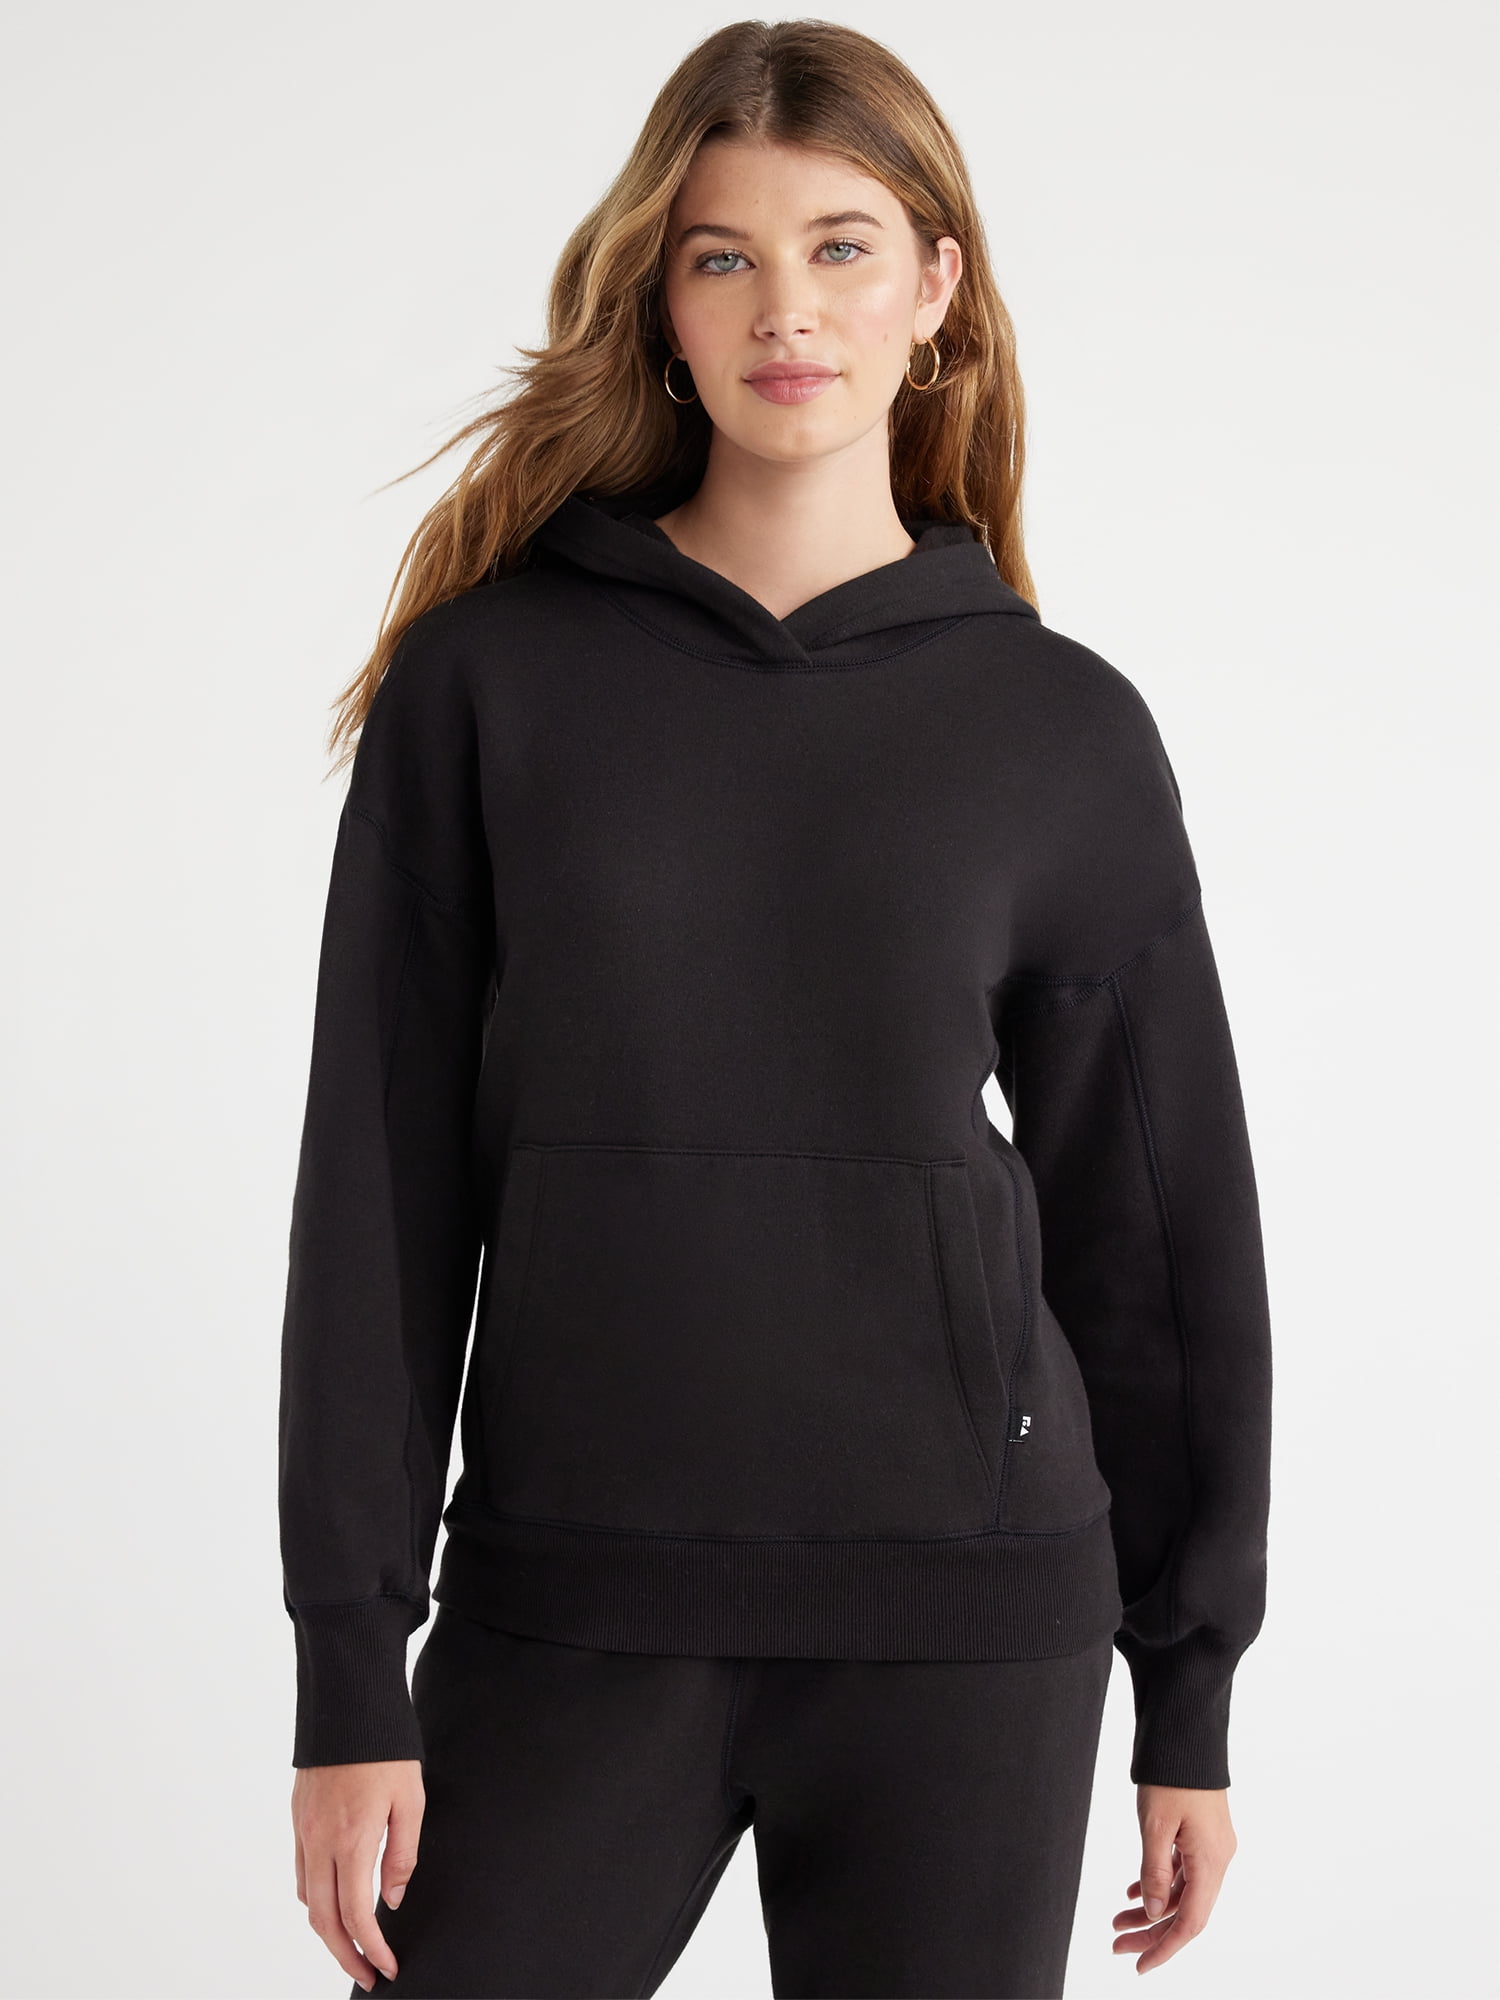 Free Assembly Women's Easy Sweatshirt Hoodie with Long Sleeves, Sizes ...